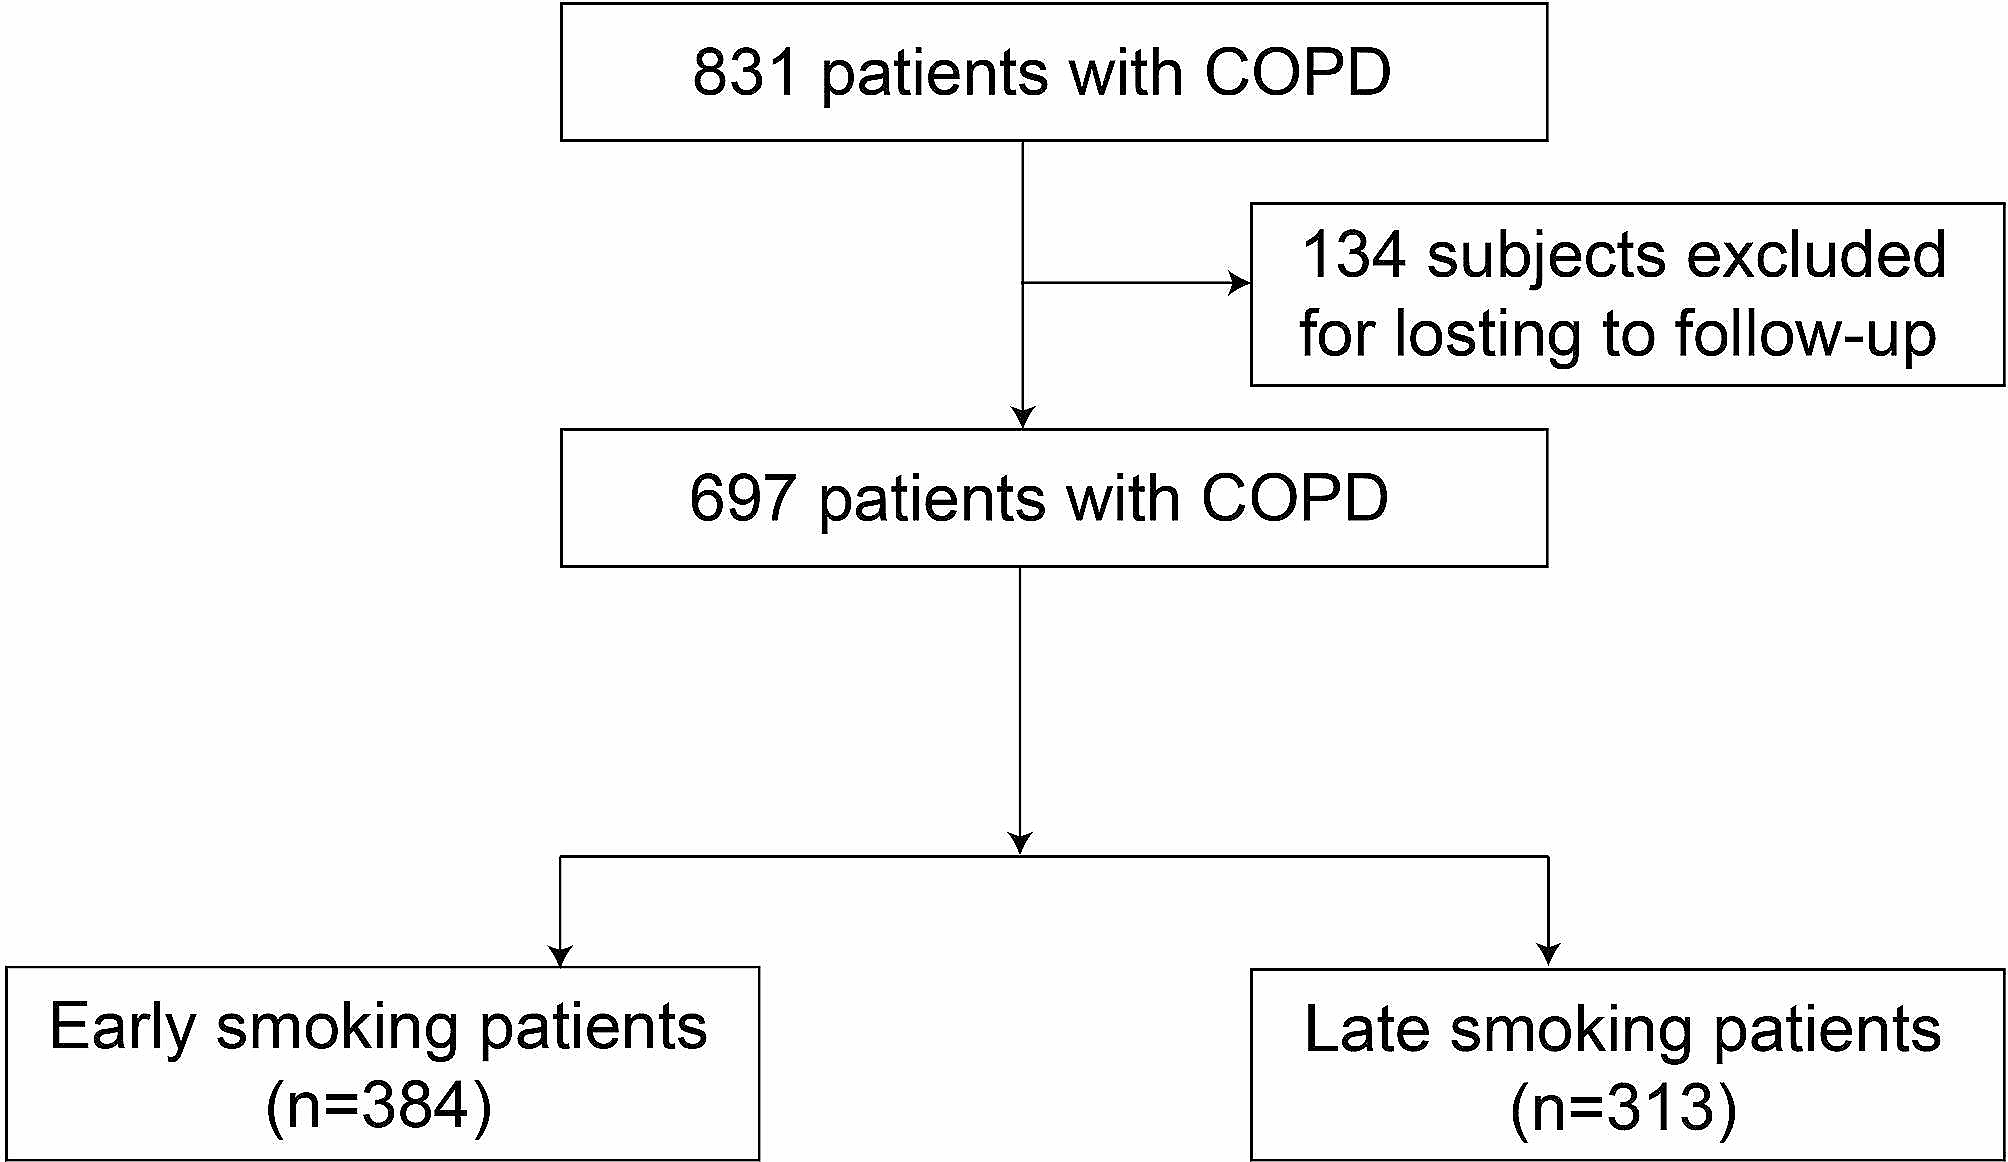 Early smoking lead to worse prognosis of COPD patients: a real world study